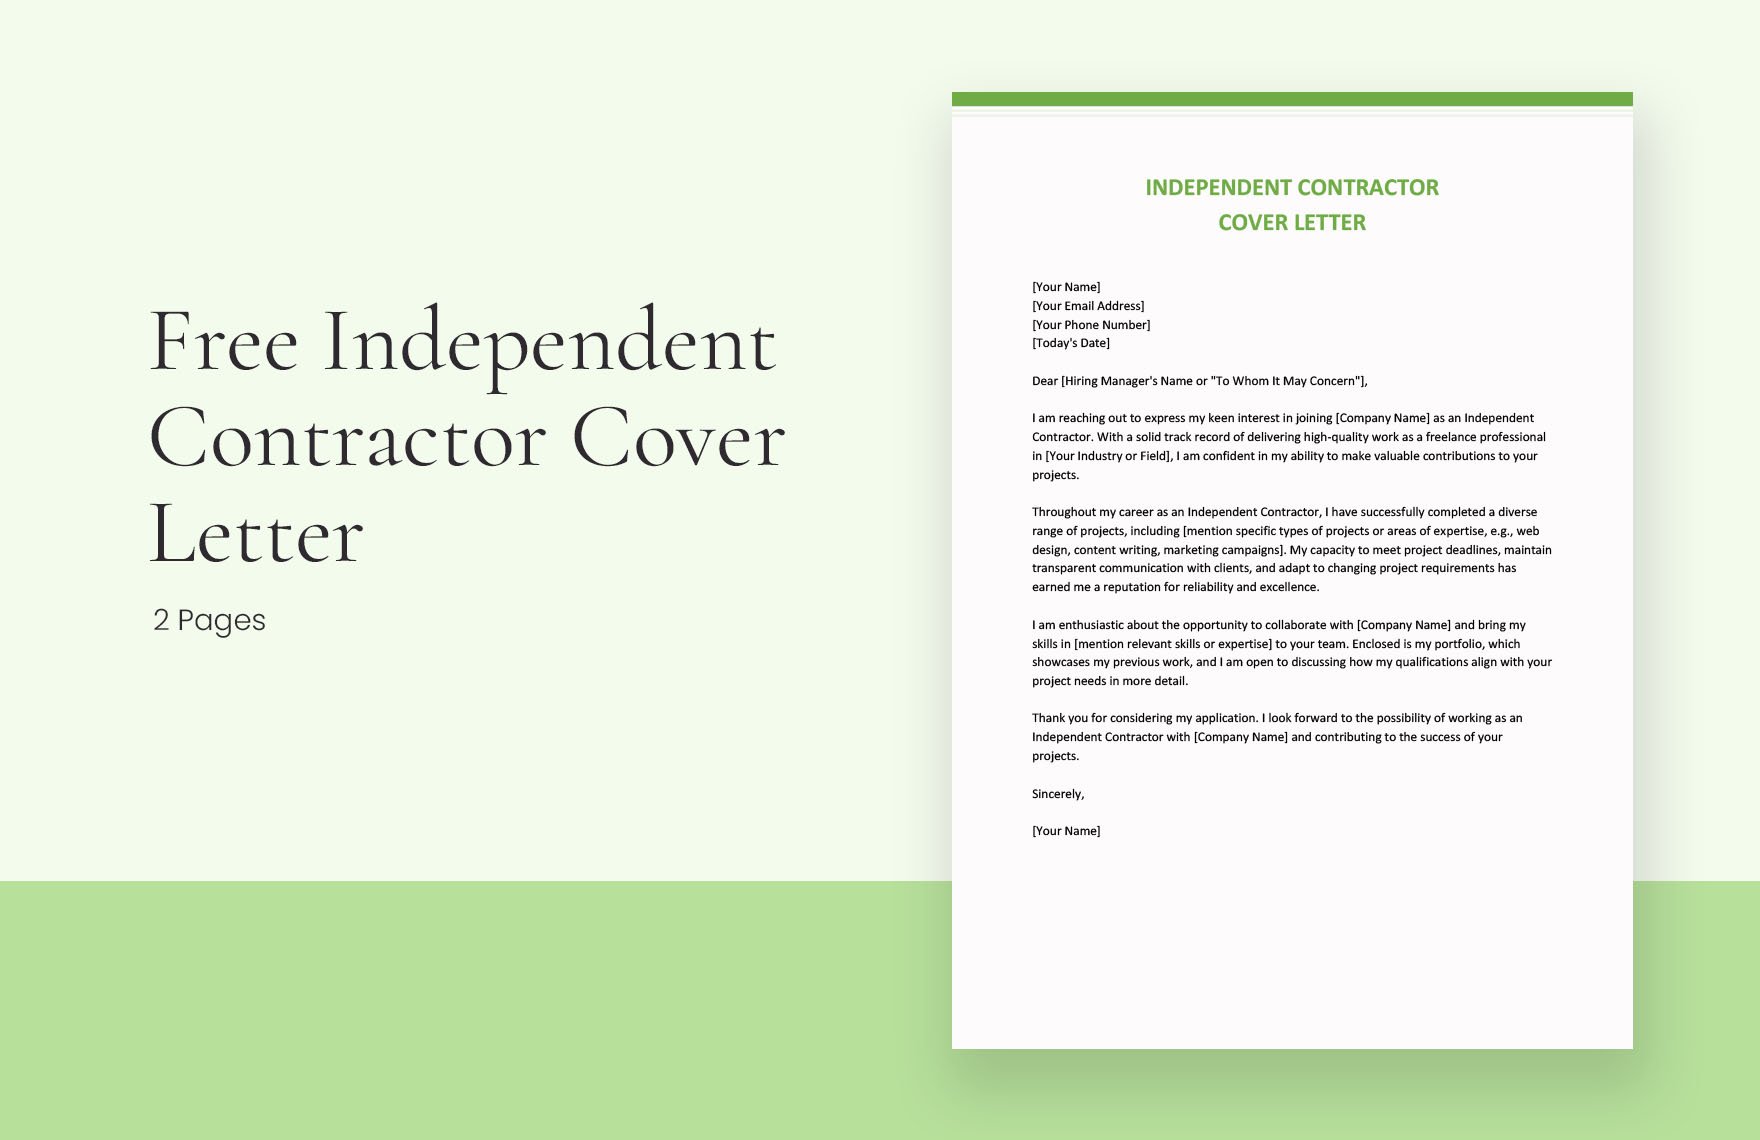 Independent Contractor Cover Letter in Word, Google Docs